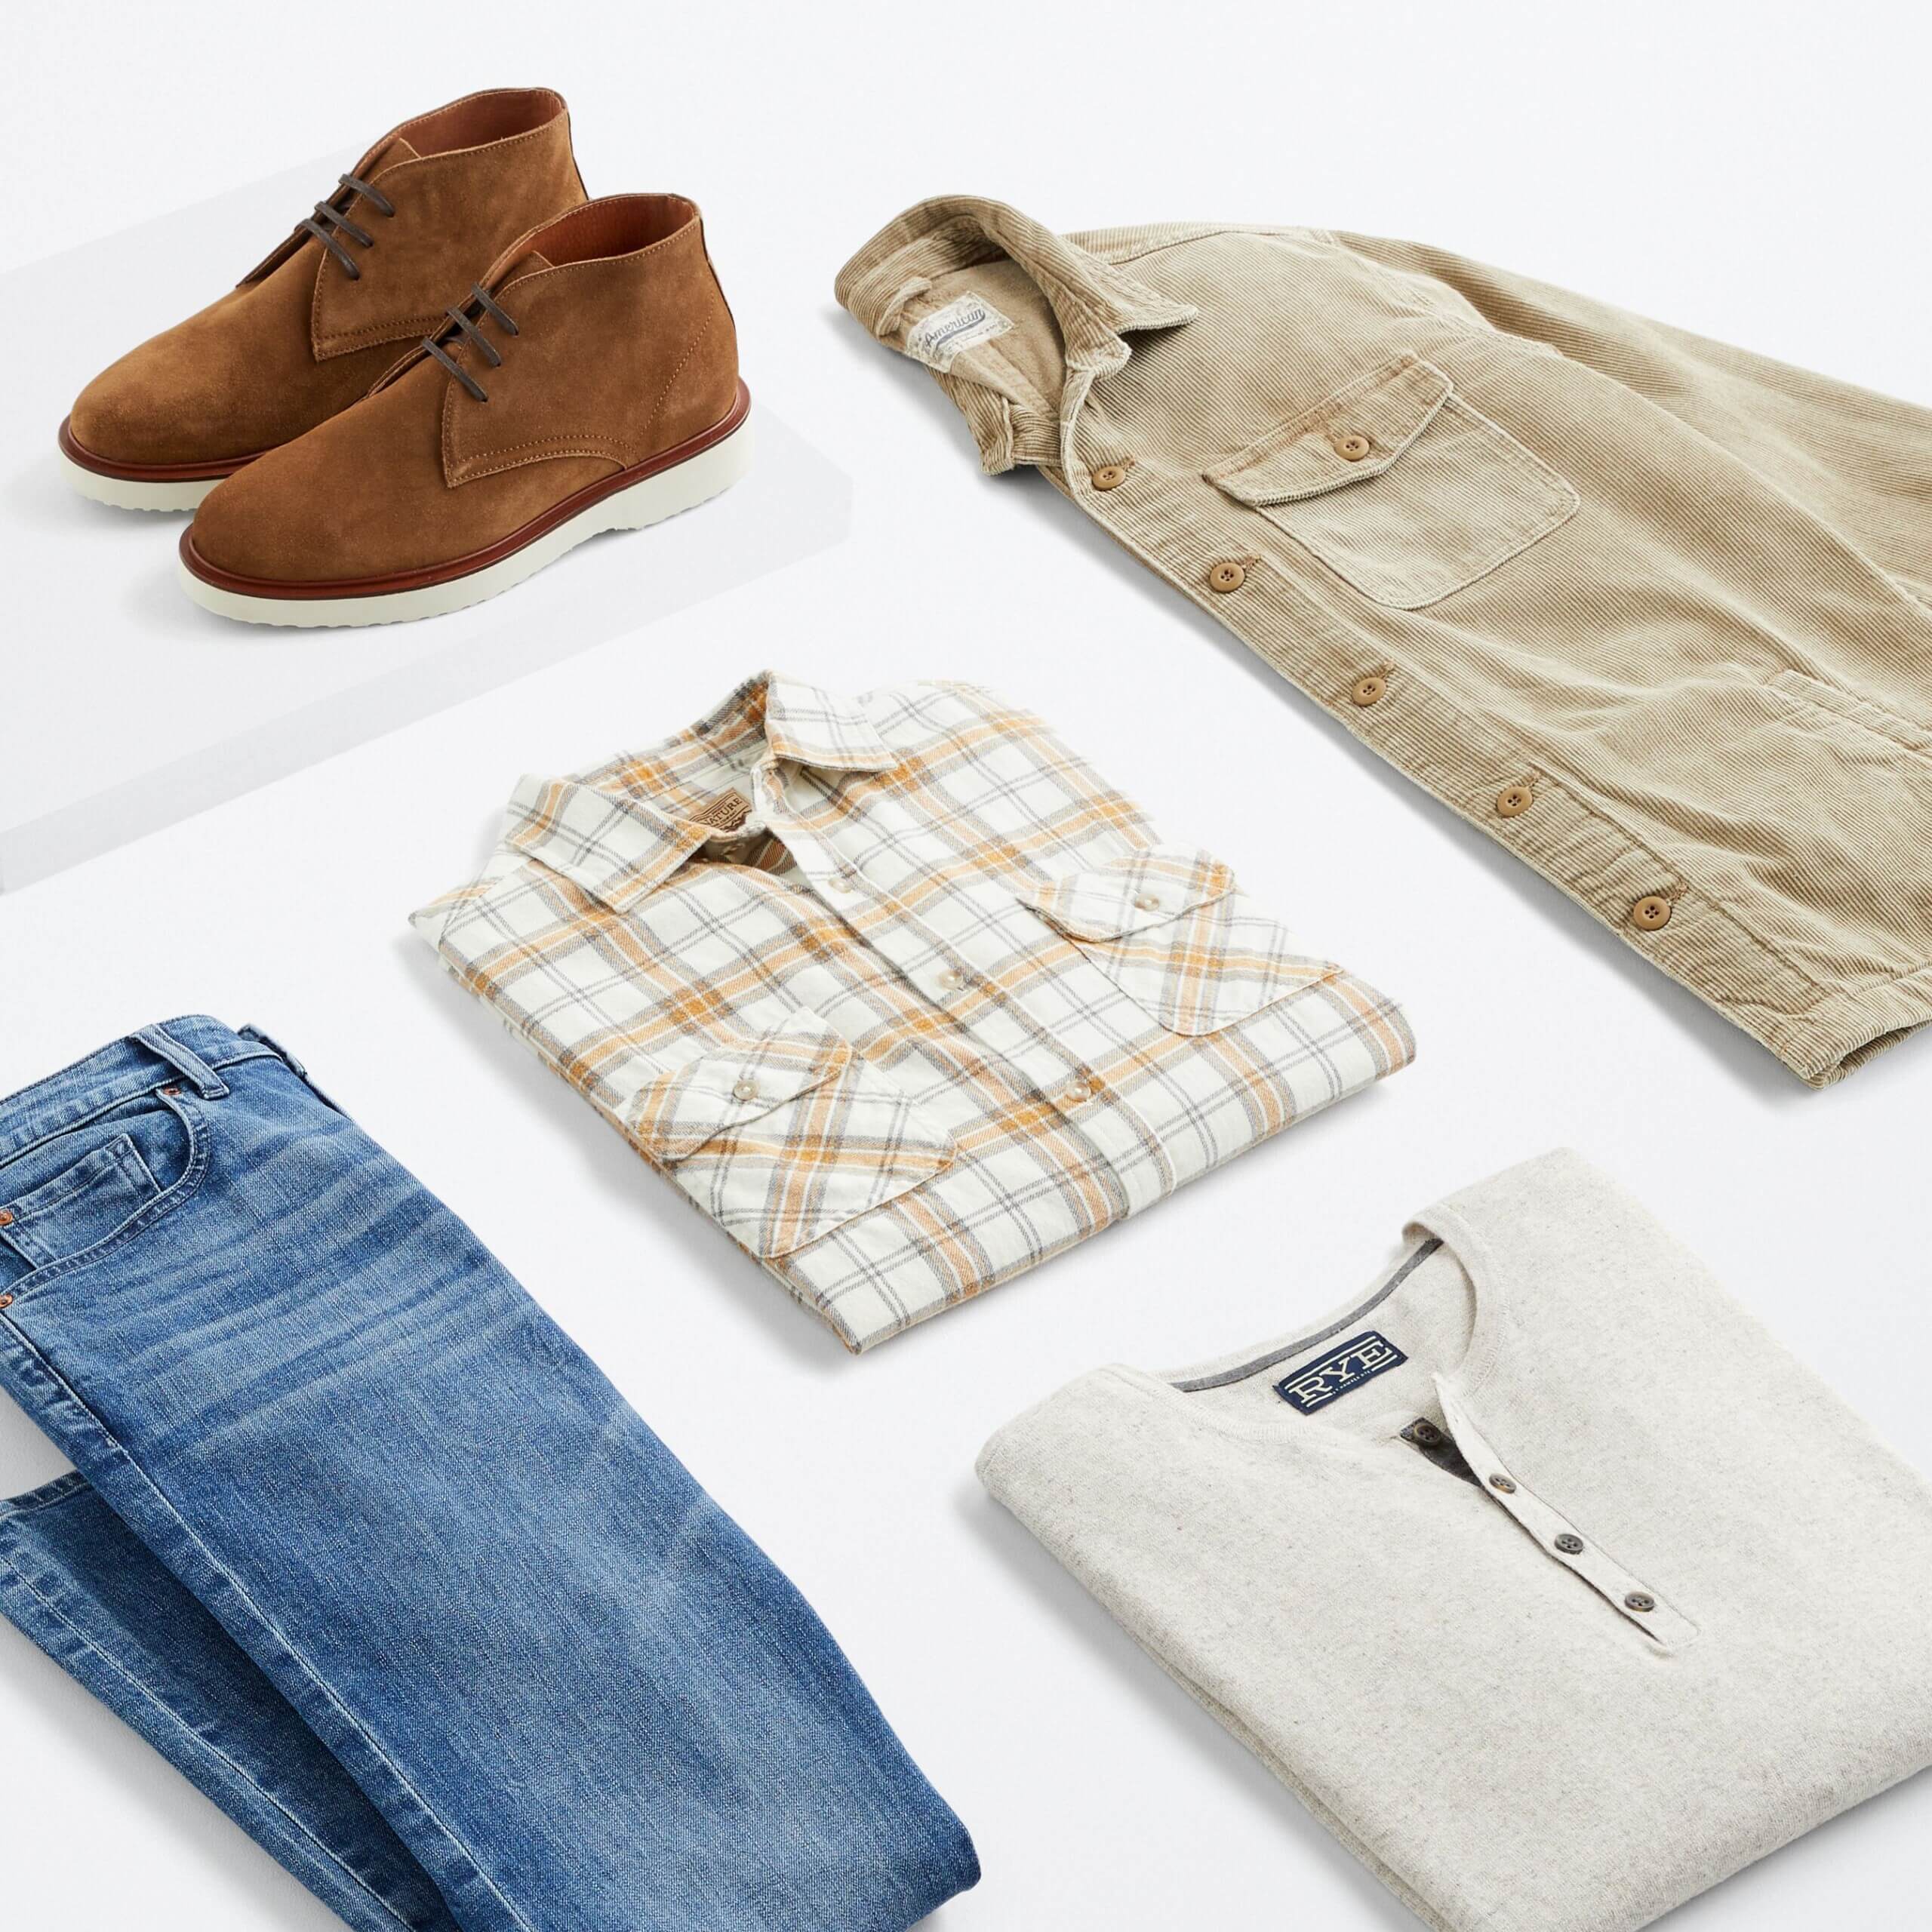 Stitch Fix men's outfit laydown featuring blue jeans, cream henley, plaid button-down, beige cord jacket and tan chukka boots. 